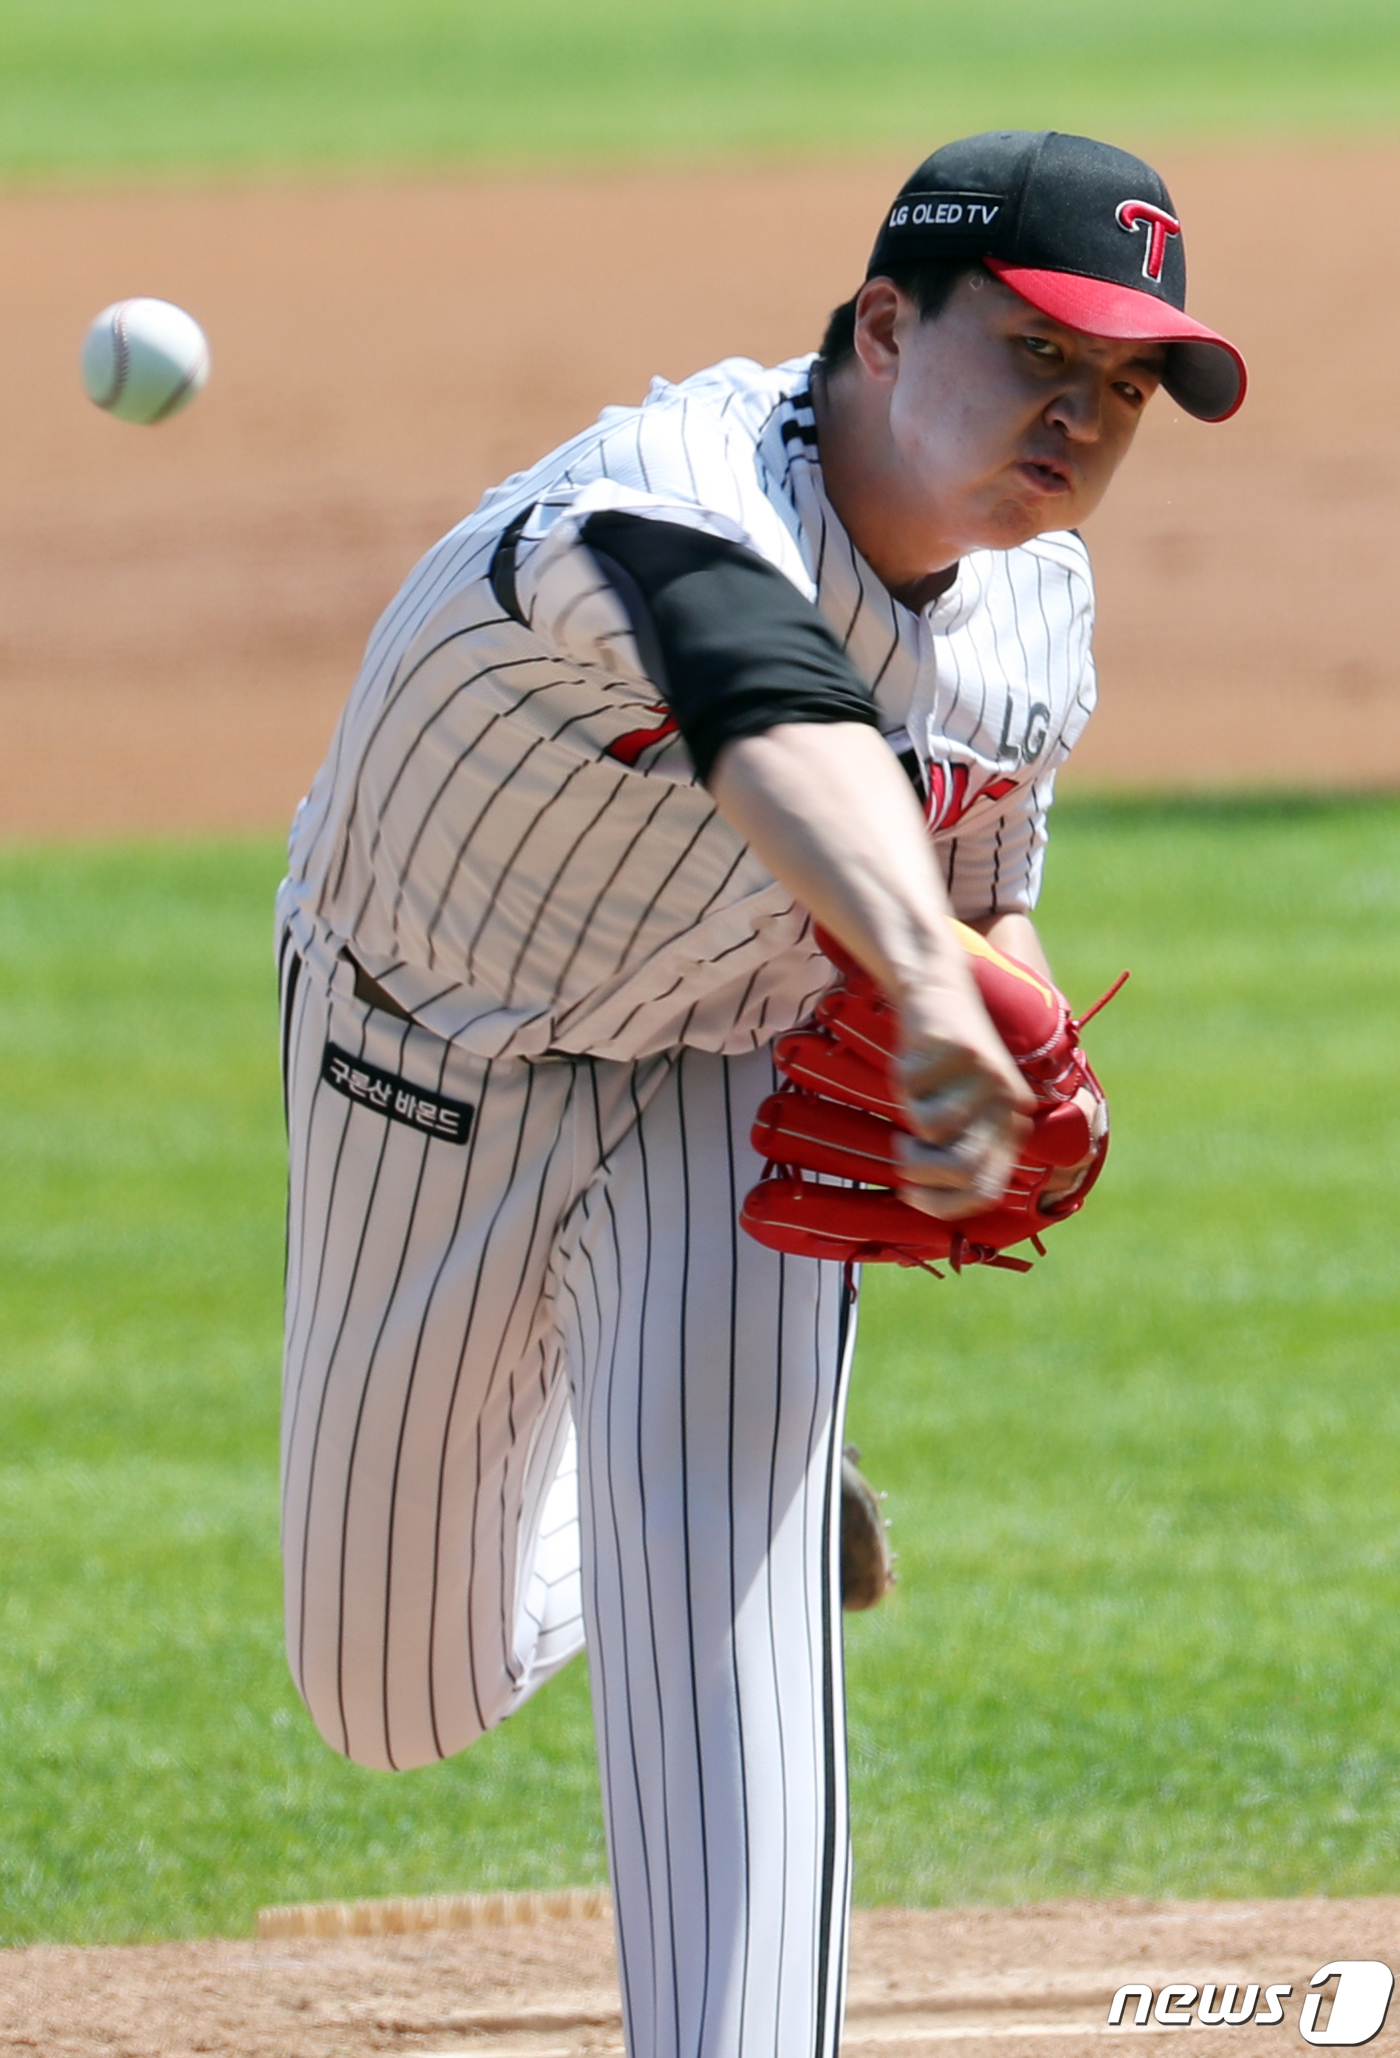 Lee Min-ho scored a first-round start with the SK Wyverns in the 2020 Shinhan Bank SOL KBO League at the Seoul Jamsil-dong Stadium on the 11th, and a single strikeout with seven innings and six hits in seven innings.Lee Min-ho, whose team passed the Mound in the eighth inning with a 3-1 win, recorded two wins (1 loss) for the season.He is the most individual innings (7 innings) tie and has played the most pitches (112 pitches) since debut.High school graduate Lee Min-ho, who has emerged as LGs hit product this year, has pitched well in the past two Kyonggi (513 innings without a run against the Samsung Lions on May 21 and two innings against the Samsung Lions on June 2).Ryu believed Lee Min-ho without changing the starter, even though he was the first game of the double header, which is the most important part of the day.And Lee Min-ho has taken a snow stamp with a hoot that responds to trust.In the first inning, after a bad luck hit Choi Ji-hoon after one out, I was sorry until I gave Romac a first-run run with a timely hit.However, he started pitching salty water in the second inning, and gave up one hit in the second and third innings, but all of them were put in the next round, and in the fourth inning, Jung Yoon - Jung Jin Ki - Choi was returned to the third round.In the fifth inning, he was also clean in the third inning. He hit 2 Hit in the sixth inning and was on first and second bases, but he showed off his ability to manage the crisis by turning all Jamie Lomac, Choi Jung and Jeong Jin Ki.Lee Min-ho, who threw 98 balls in the sixth inning, made the start in the seventh, as opposed to his expectations, and he was shown the intention of Ryu to experience various situations as a starter.And Lee Min-ho quickly caught both batters, not too agitated even with 100 pitches going over.After the second inning, he gave a ball to Jung Hyun and was nervous for a while, but soon he finished the inning with a second baseman ground ball.Lee Min-ho threw it perfectly enough to praise it, coach Ryu Joong-il said after Kyonggi.Lee Min-ho said: Thank you for your seniors effort to make the winner without giving up; today Kyonggi is generally satisfied except for the last time the sand dune came out.Molly had no ball, she said.As for Ramoss two-run homer in the seventh inning, he said, I thought yes. Thank you to the batters.Ryu Joong-il director perfect enough to praise